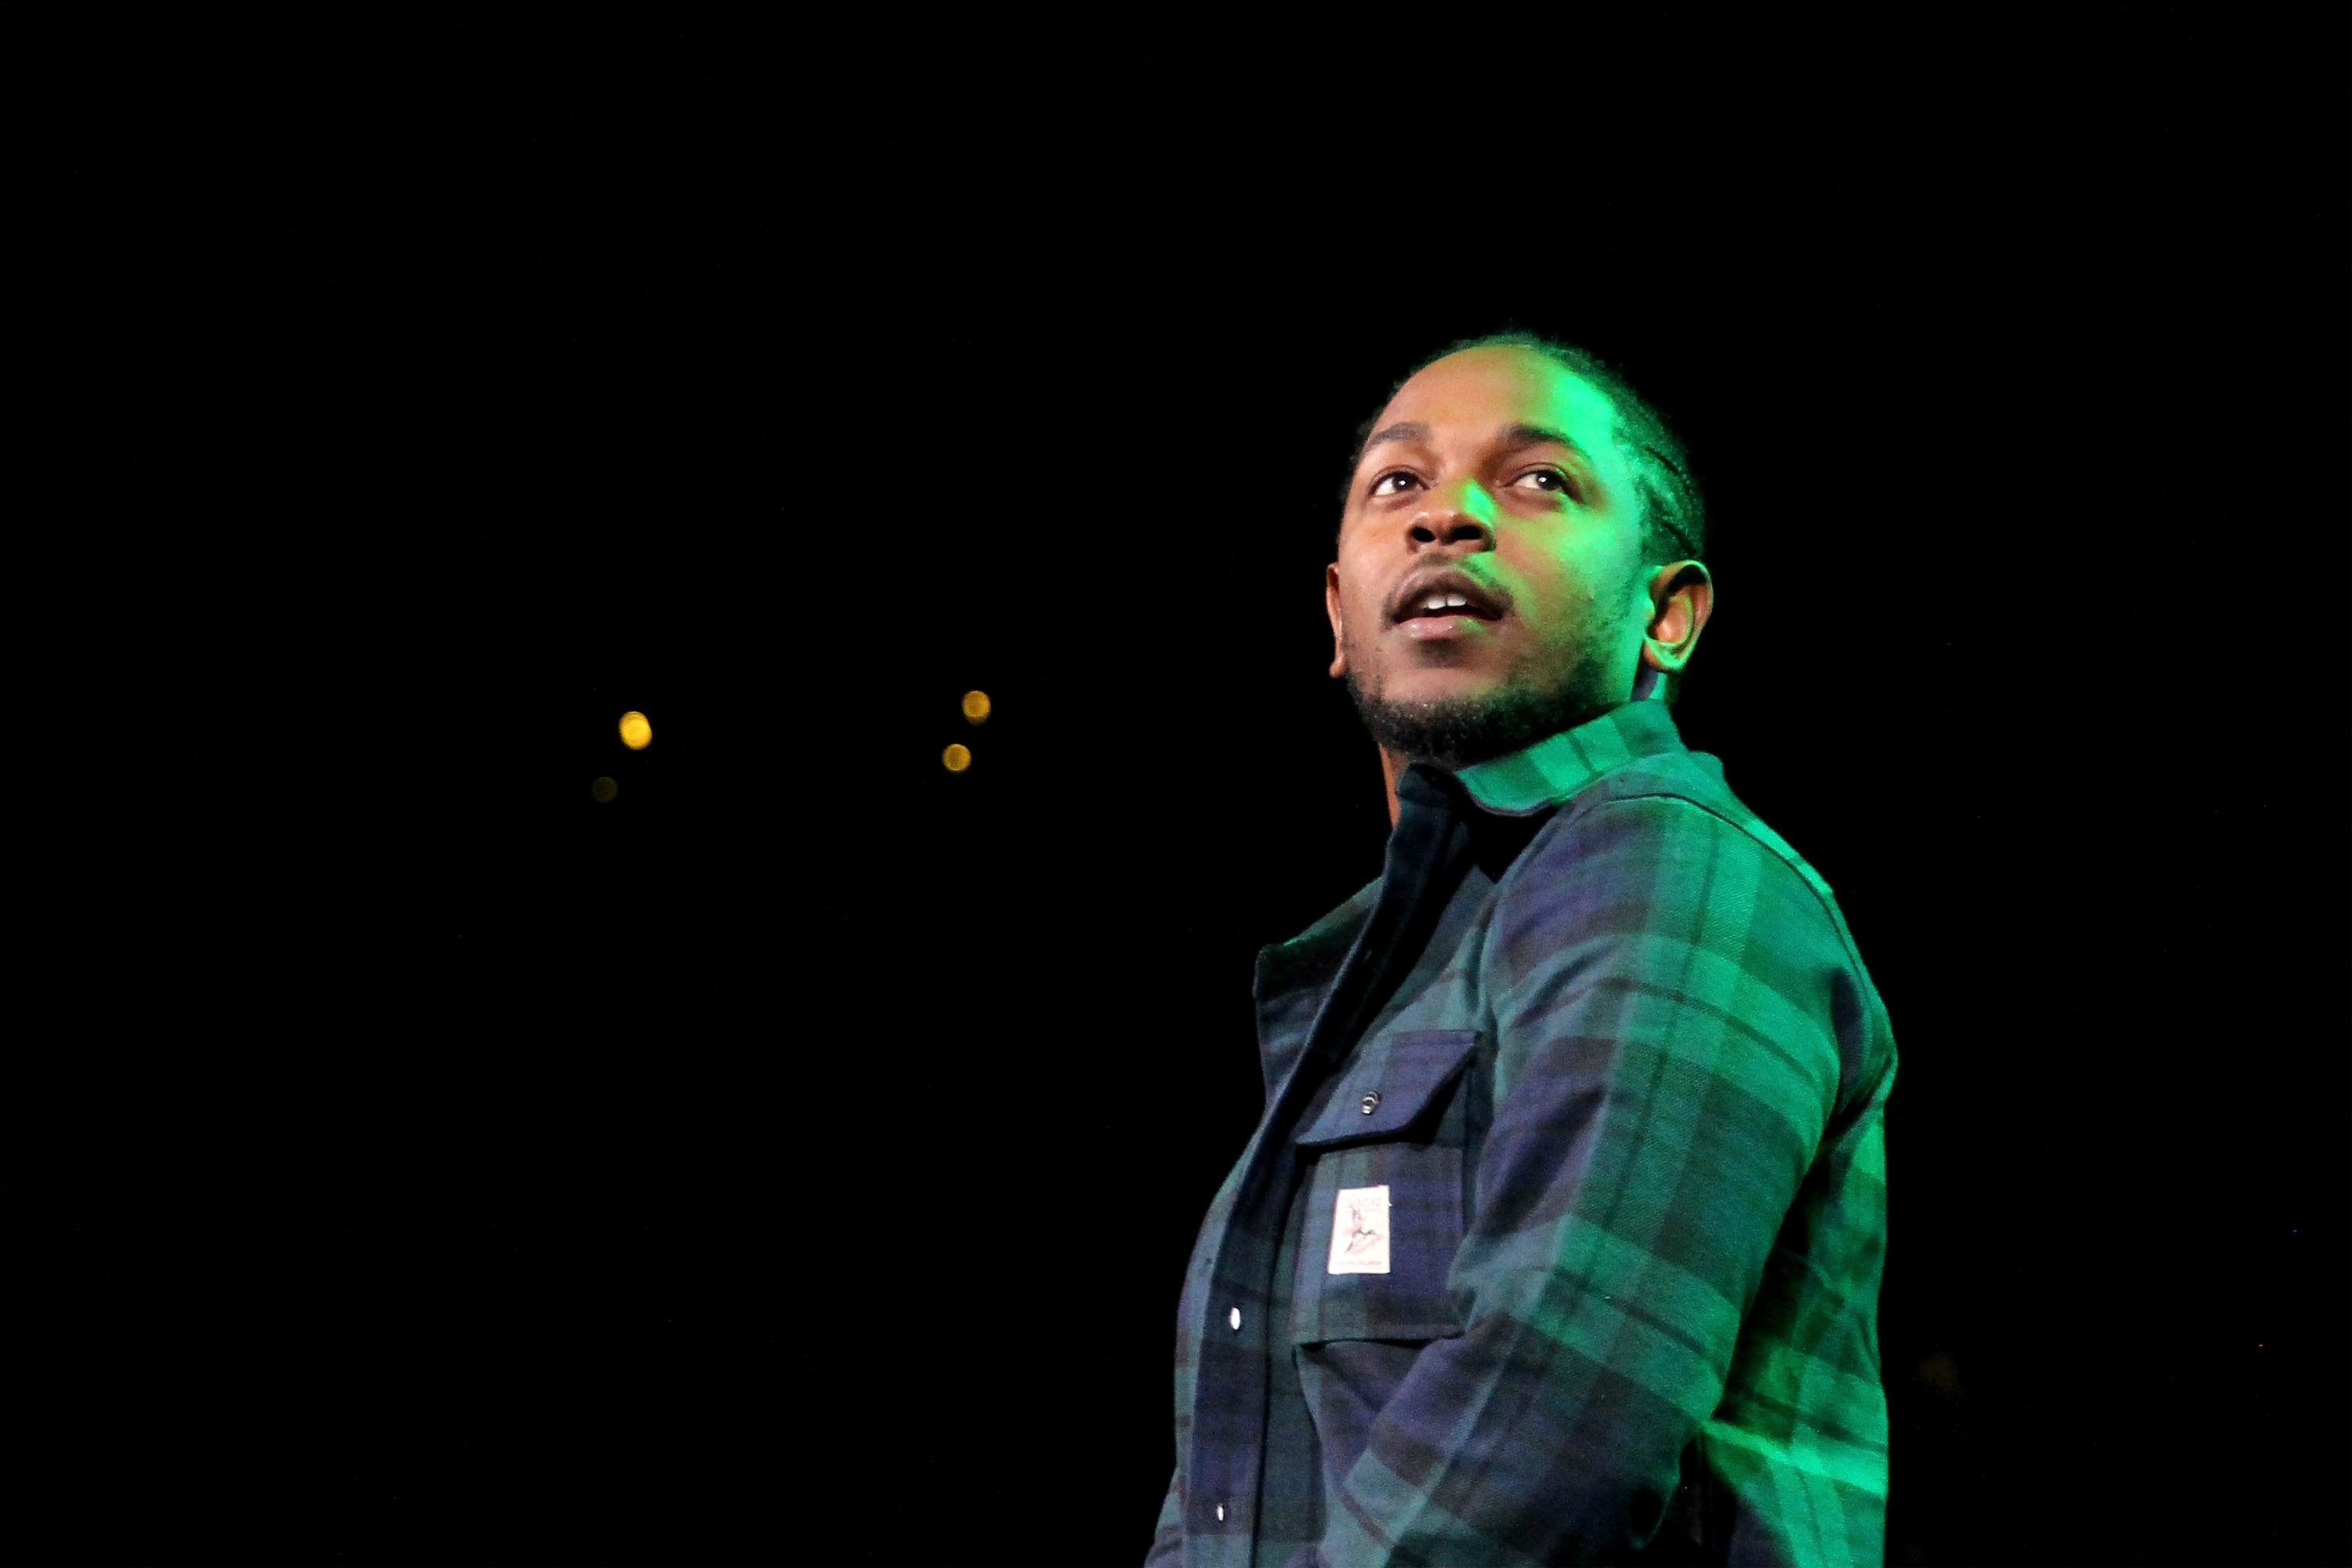 Obama brought Kendrick Lamar to the White House for the 4th of July